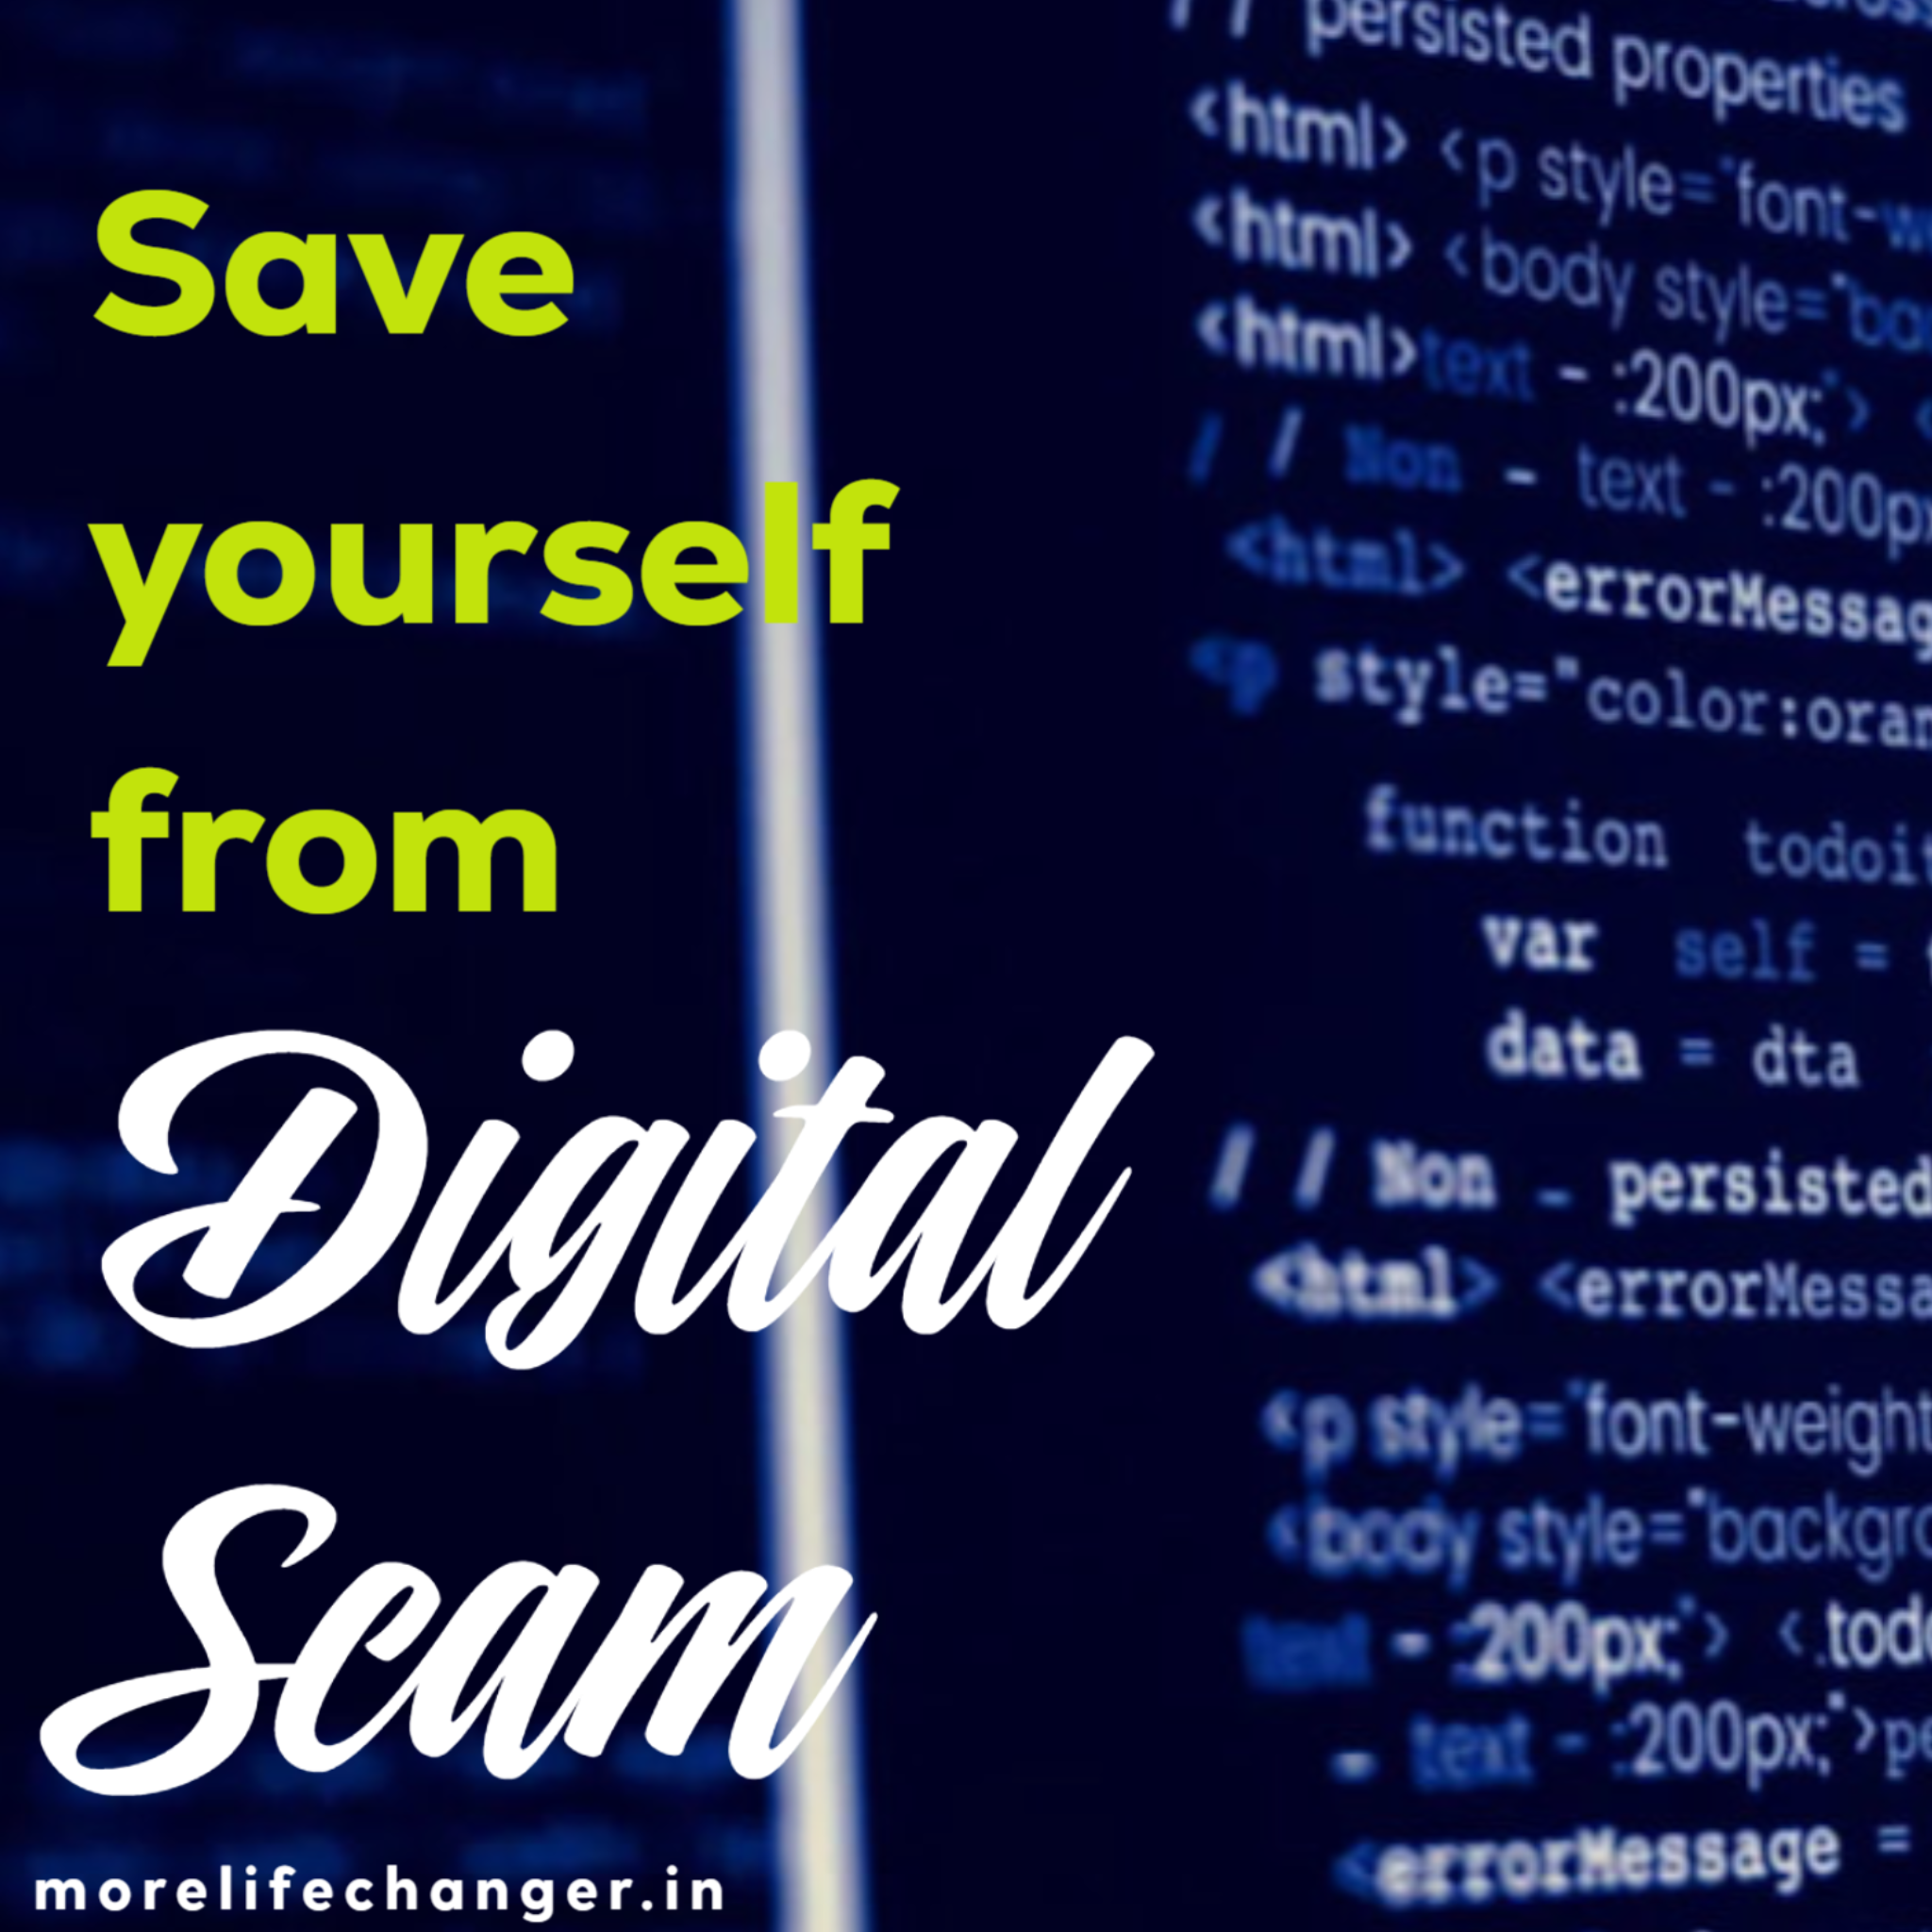 Save yourself from digital scam